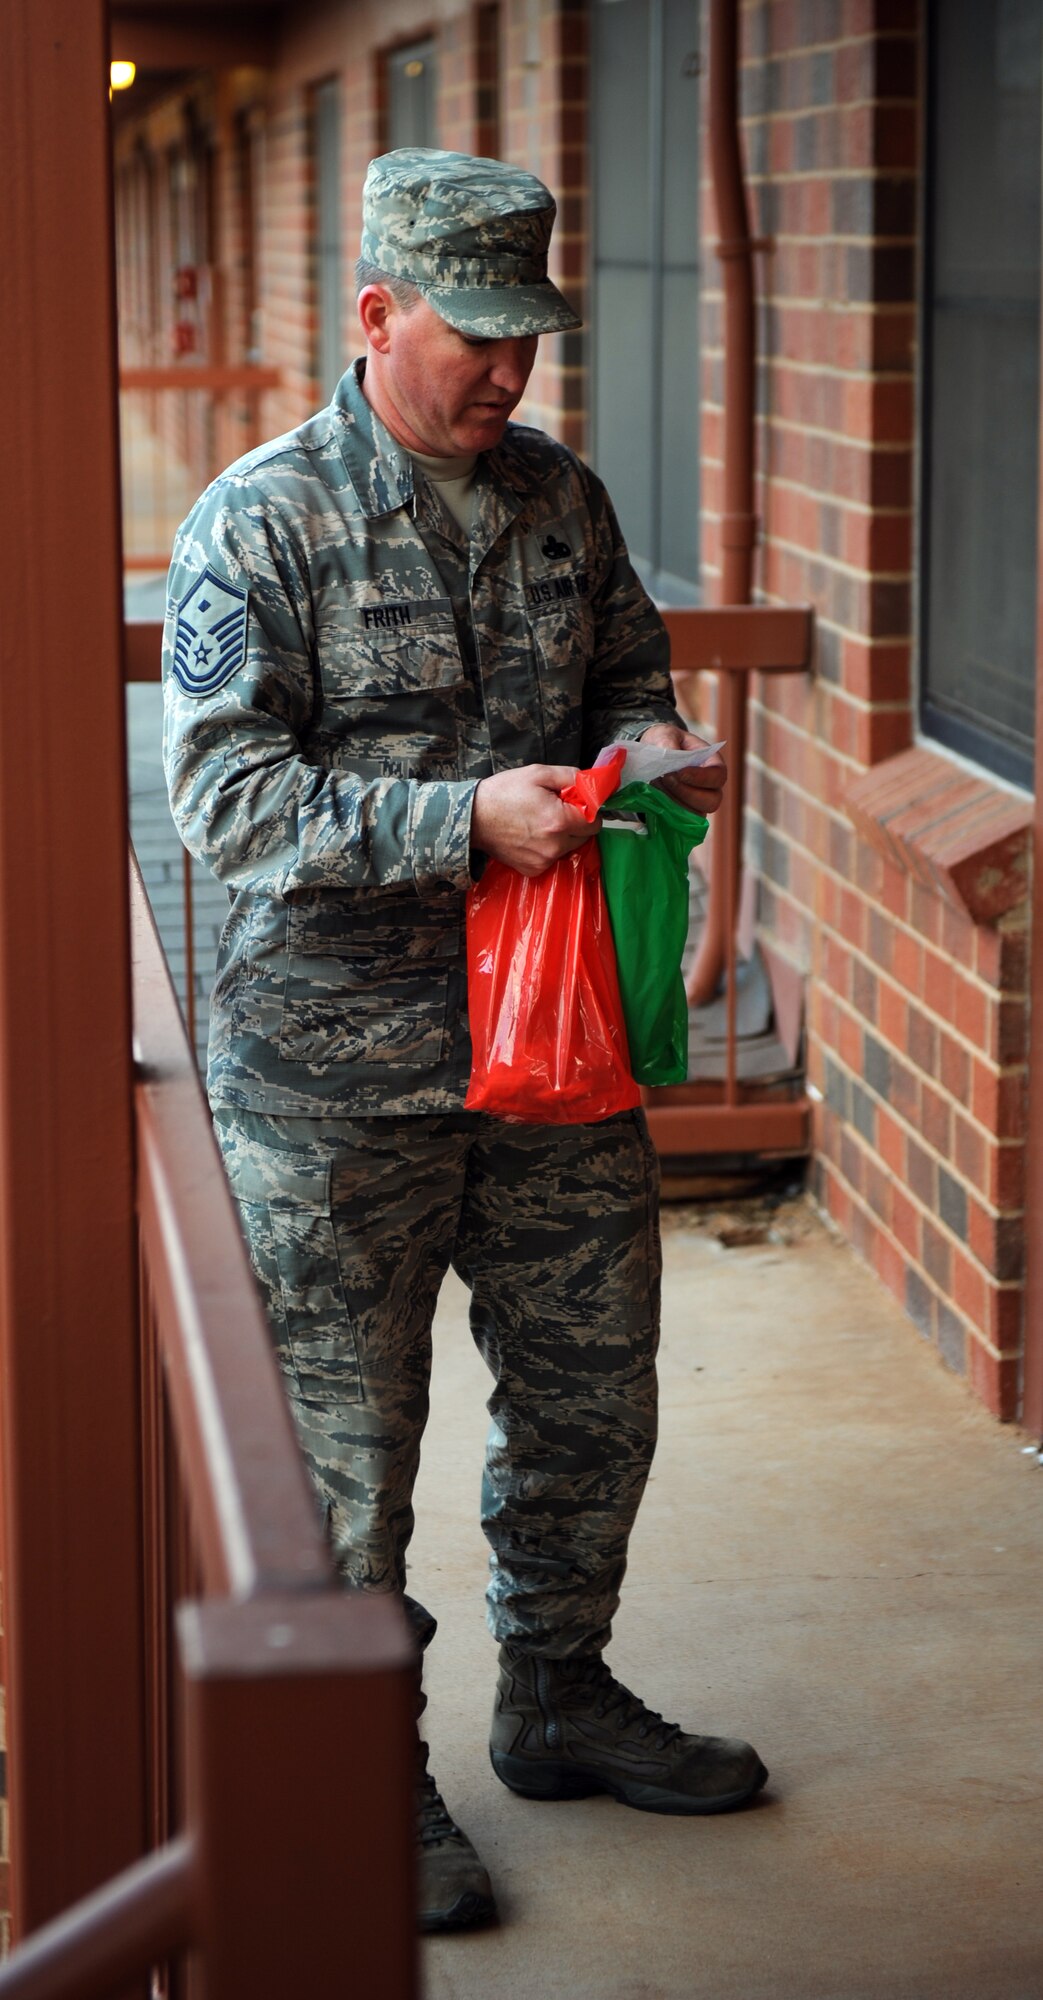 U.S. Air Force Master Sgt. John Frith, 7th Bomb Wing staff agencies first sergeant, delivers cookies to dorm residents during the annual Cookie Drop Dec. 13, 2013, at Dyess Air Force Base, Texas. In the U.S. Air Force, First Sergeant is not a rank, but a special duty held by a senior enlisted member of a military unit who reports directly to the unit commander. This billet is held by individuals of pay grades Master Sgt. through Chief Master Sgt. (U.S. Air Force photo by Airman 1st Class Alexander Guerrero/Released)